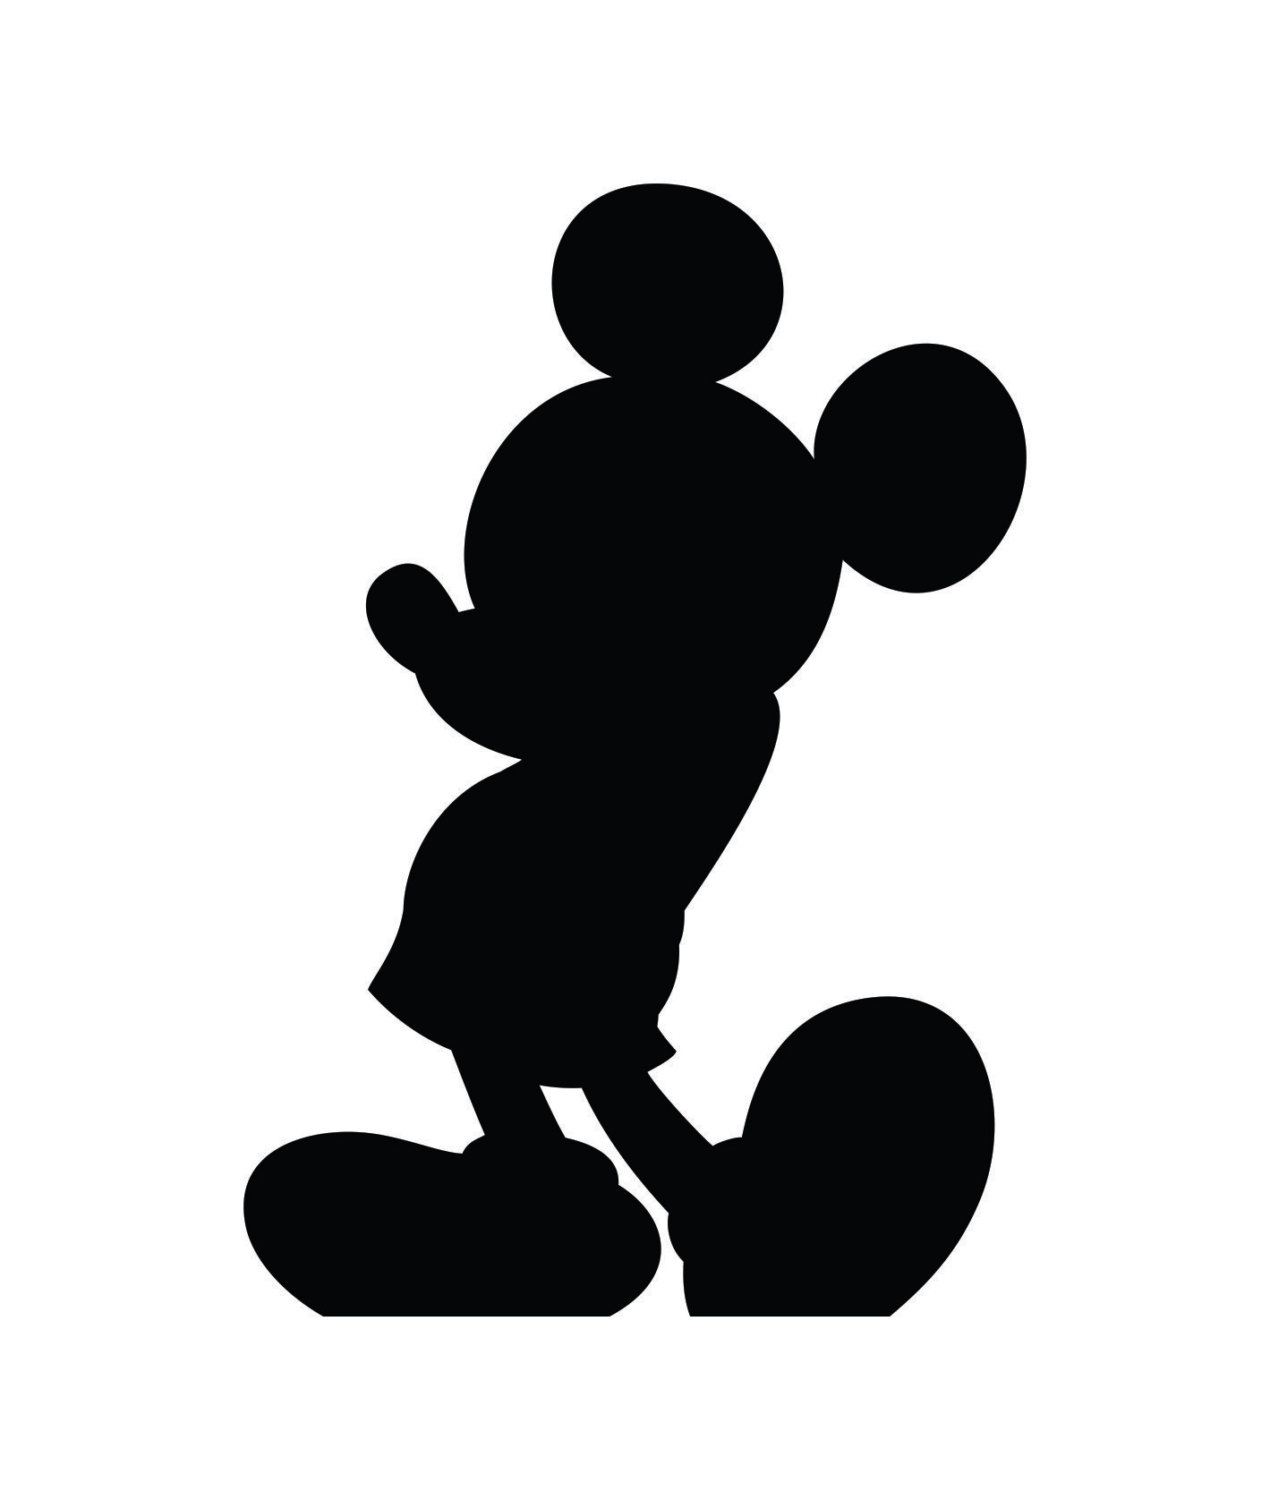 Mickey mouse silhouette clipart - ClipArt Best - ClipArt Best